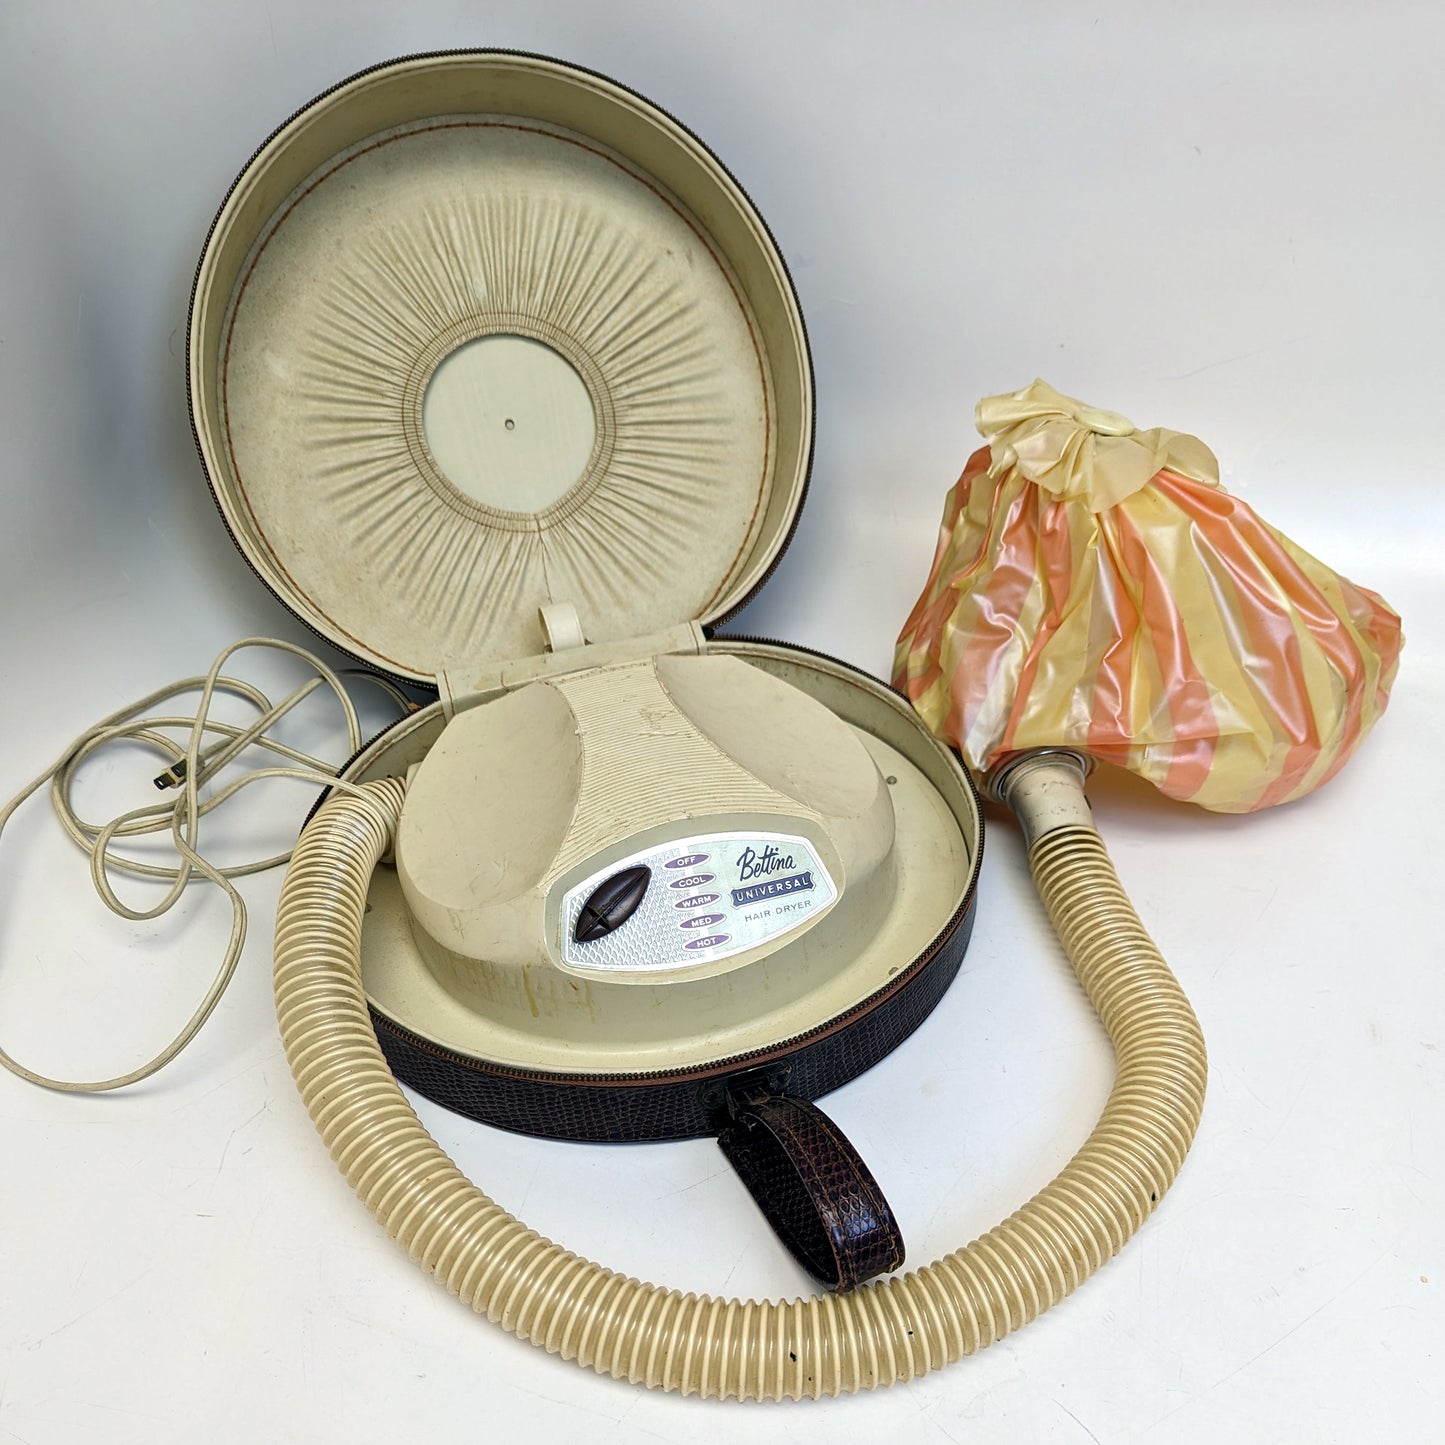 Bettina Universal Hair Dryer - 1960's Original with Faux Leather Zipper Case - WORKS!